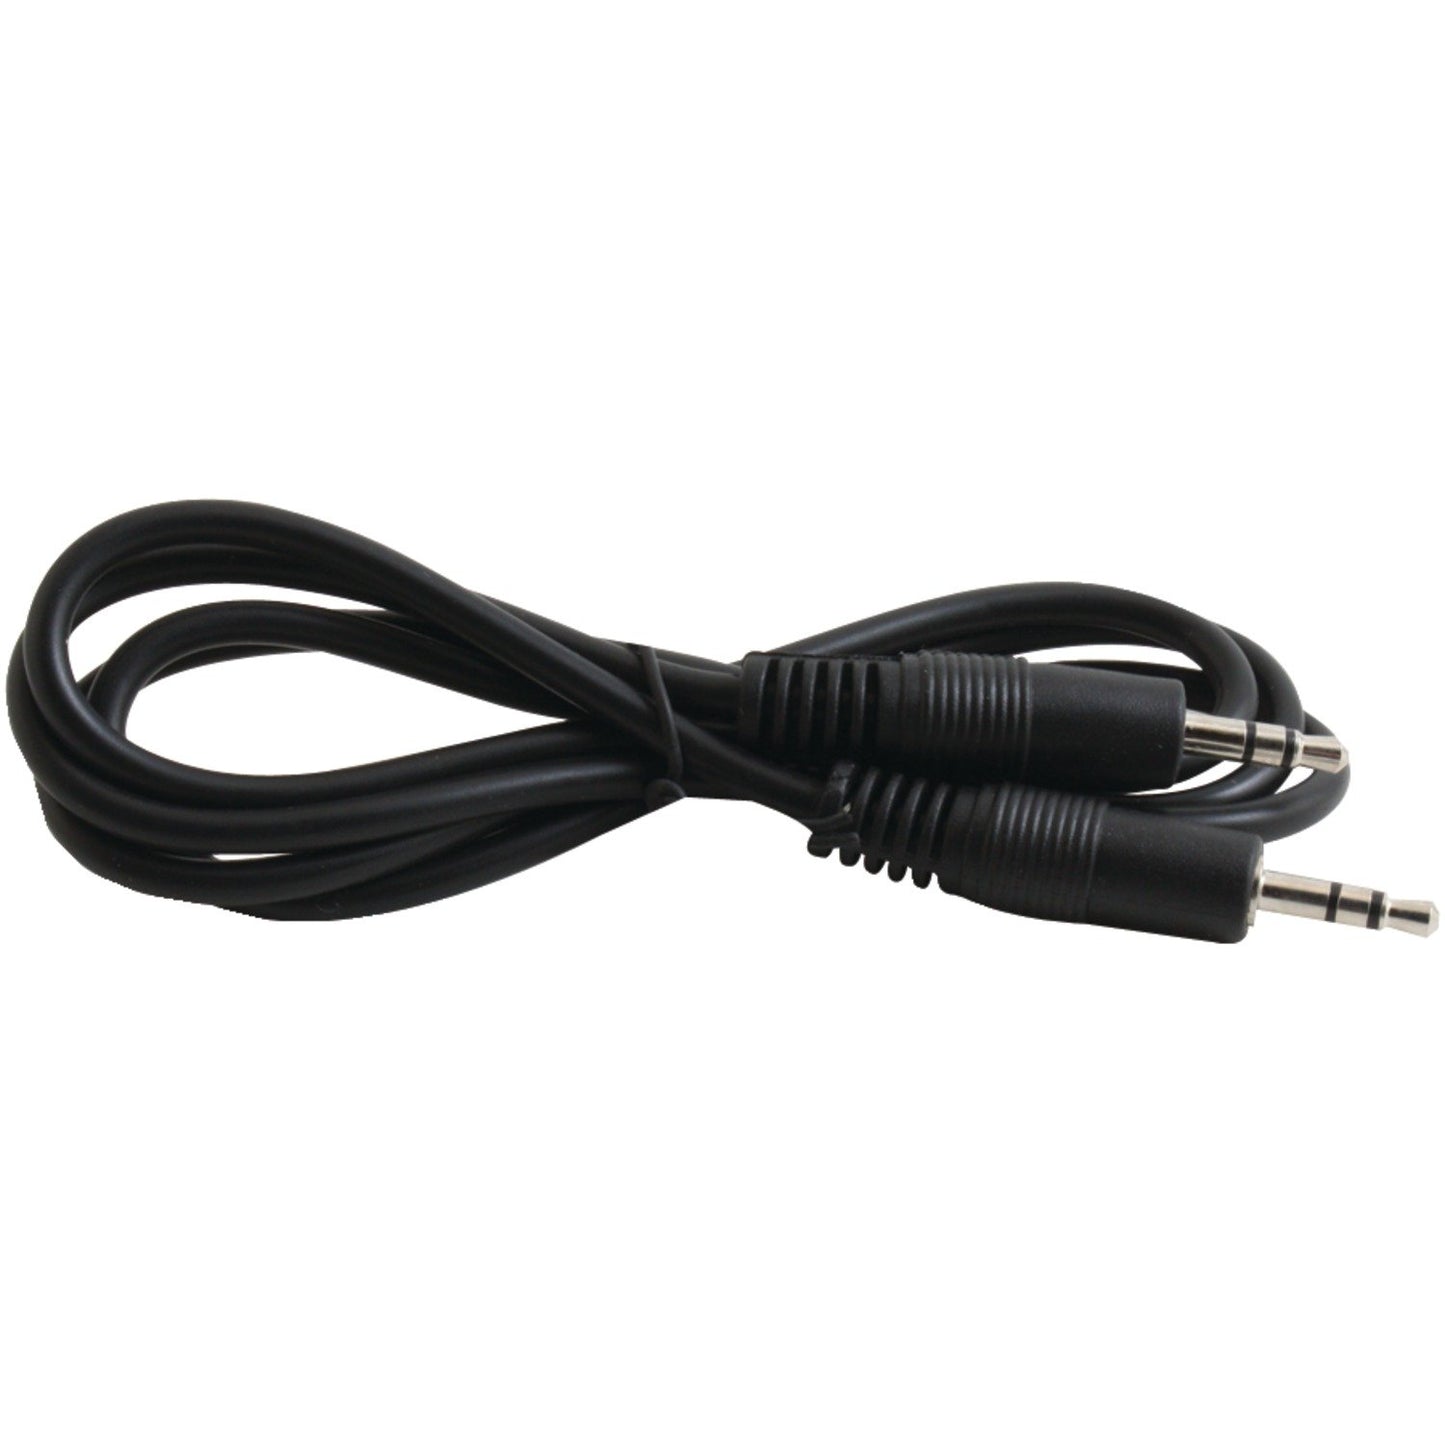 AXIS PET13-1020 Cable 3.5Mm Plugs 3'